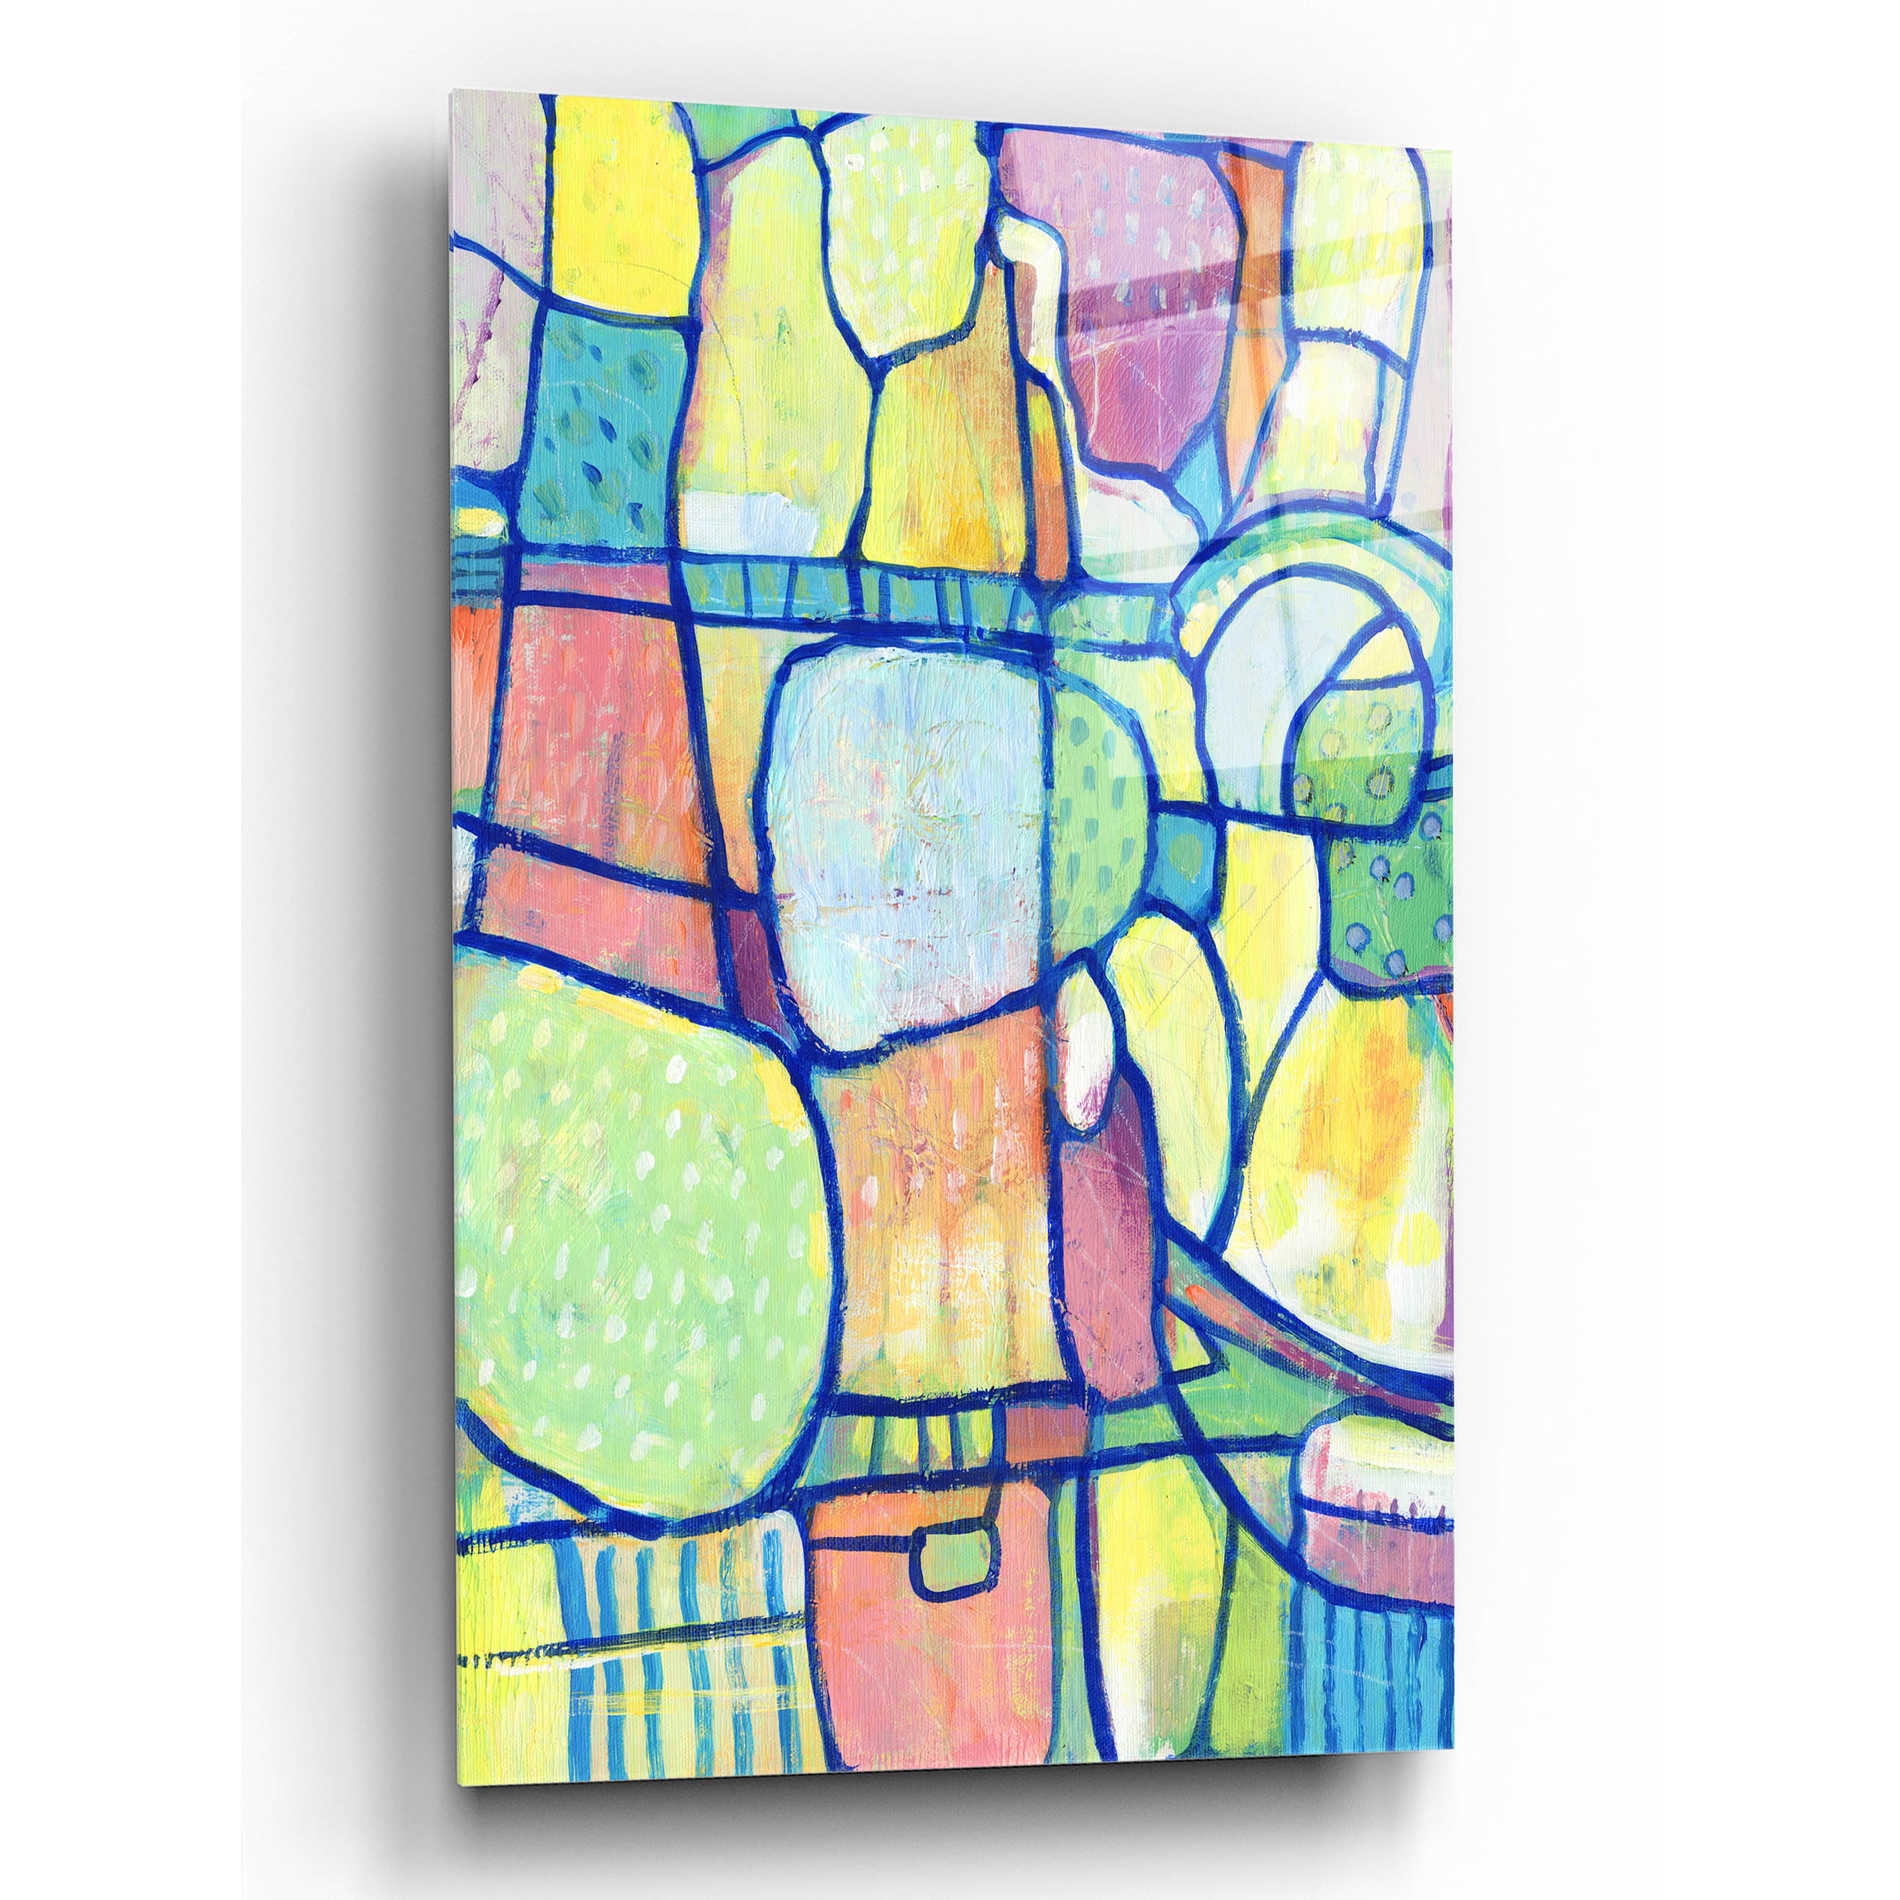 Epic Art 'Stained Glass Composition I' by Tim O'Toole, Acrylic Glass Wall Art,16x24